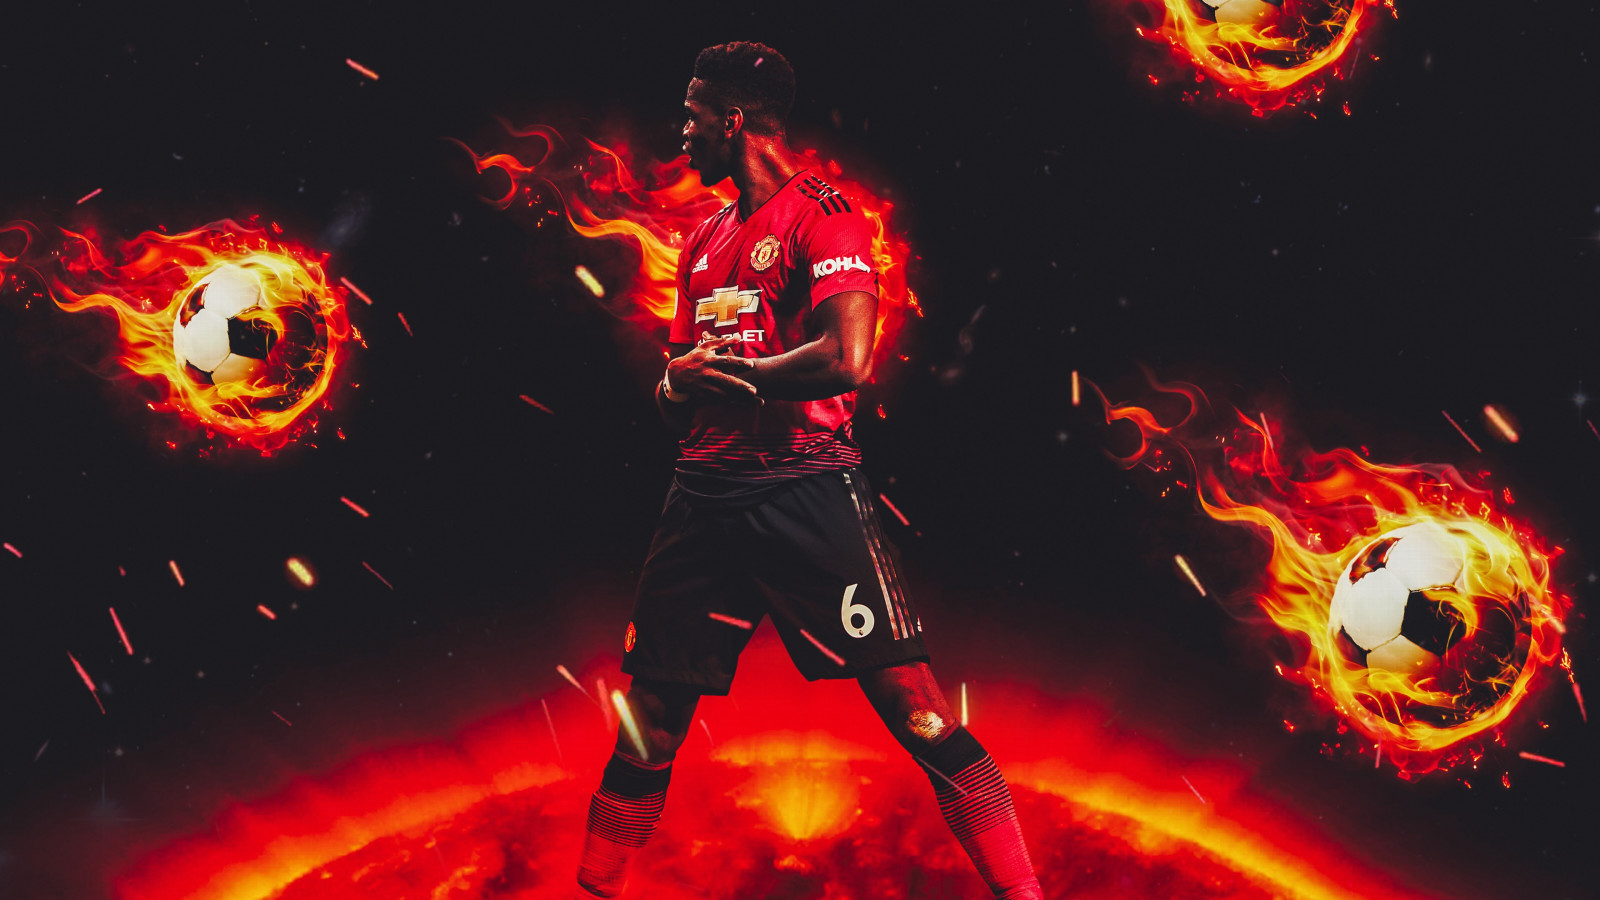 Paul Pogba for Manchester United wallpaper 1600x900